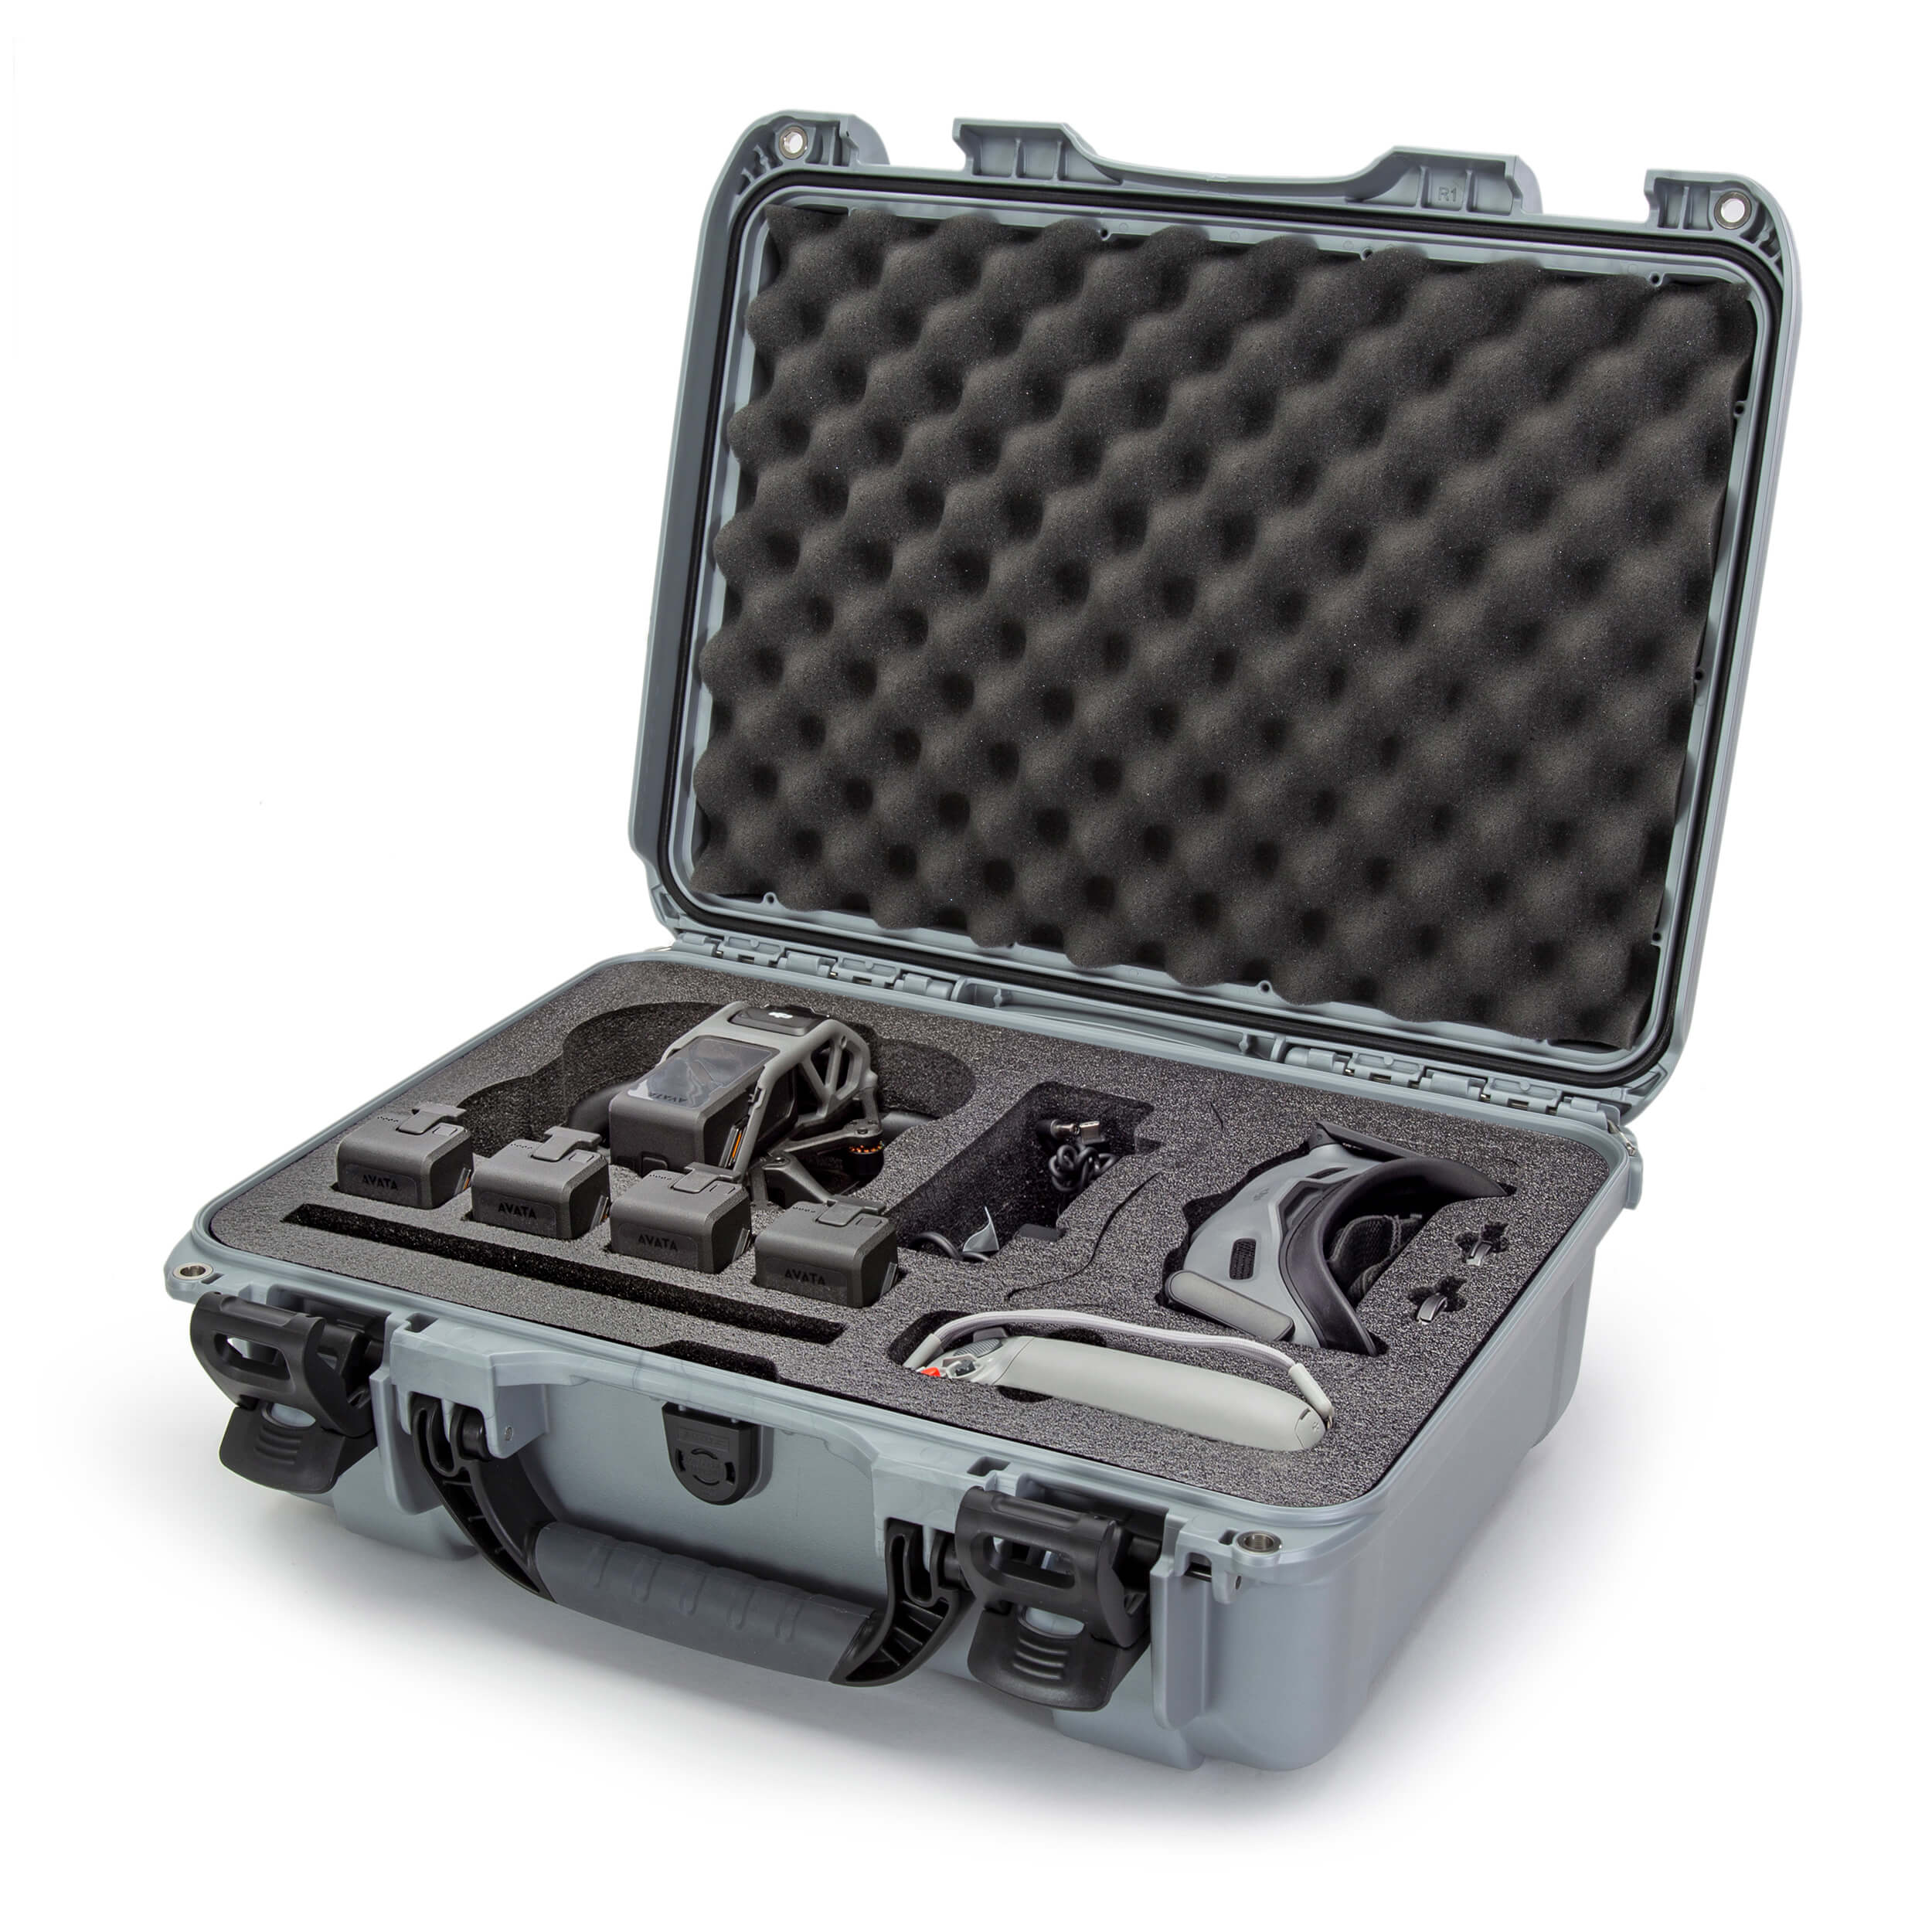 Professional case for DJI Avata Combo - extremely much space - Made in  Germany